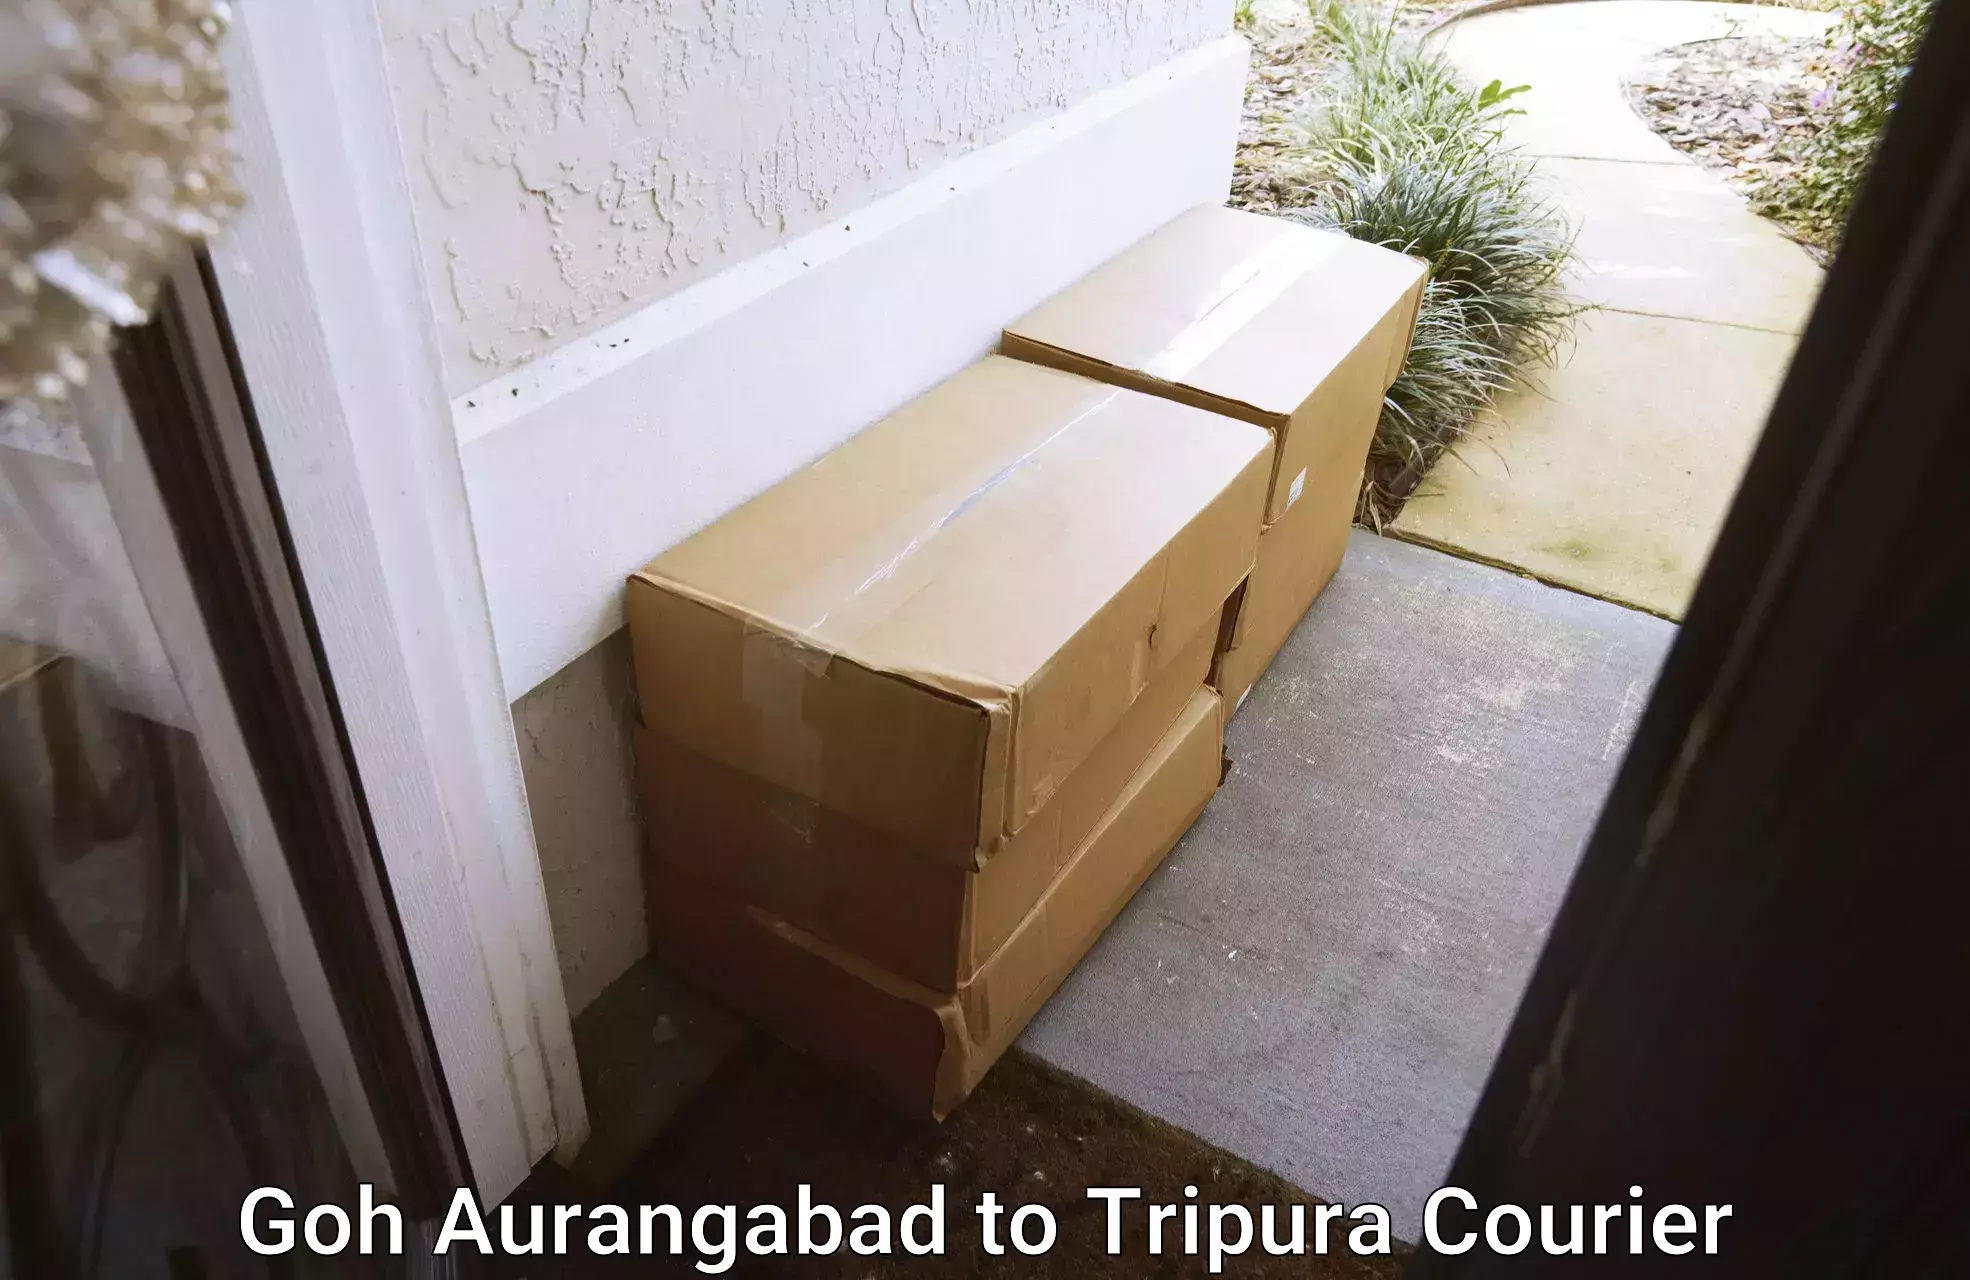 Professional movers and packers Goh Aurangabad to Tripura